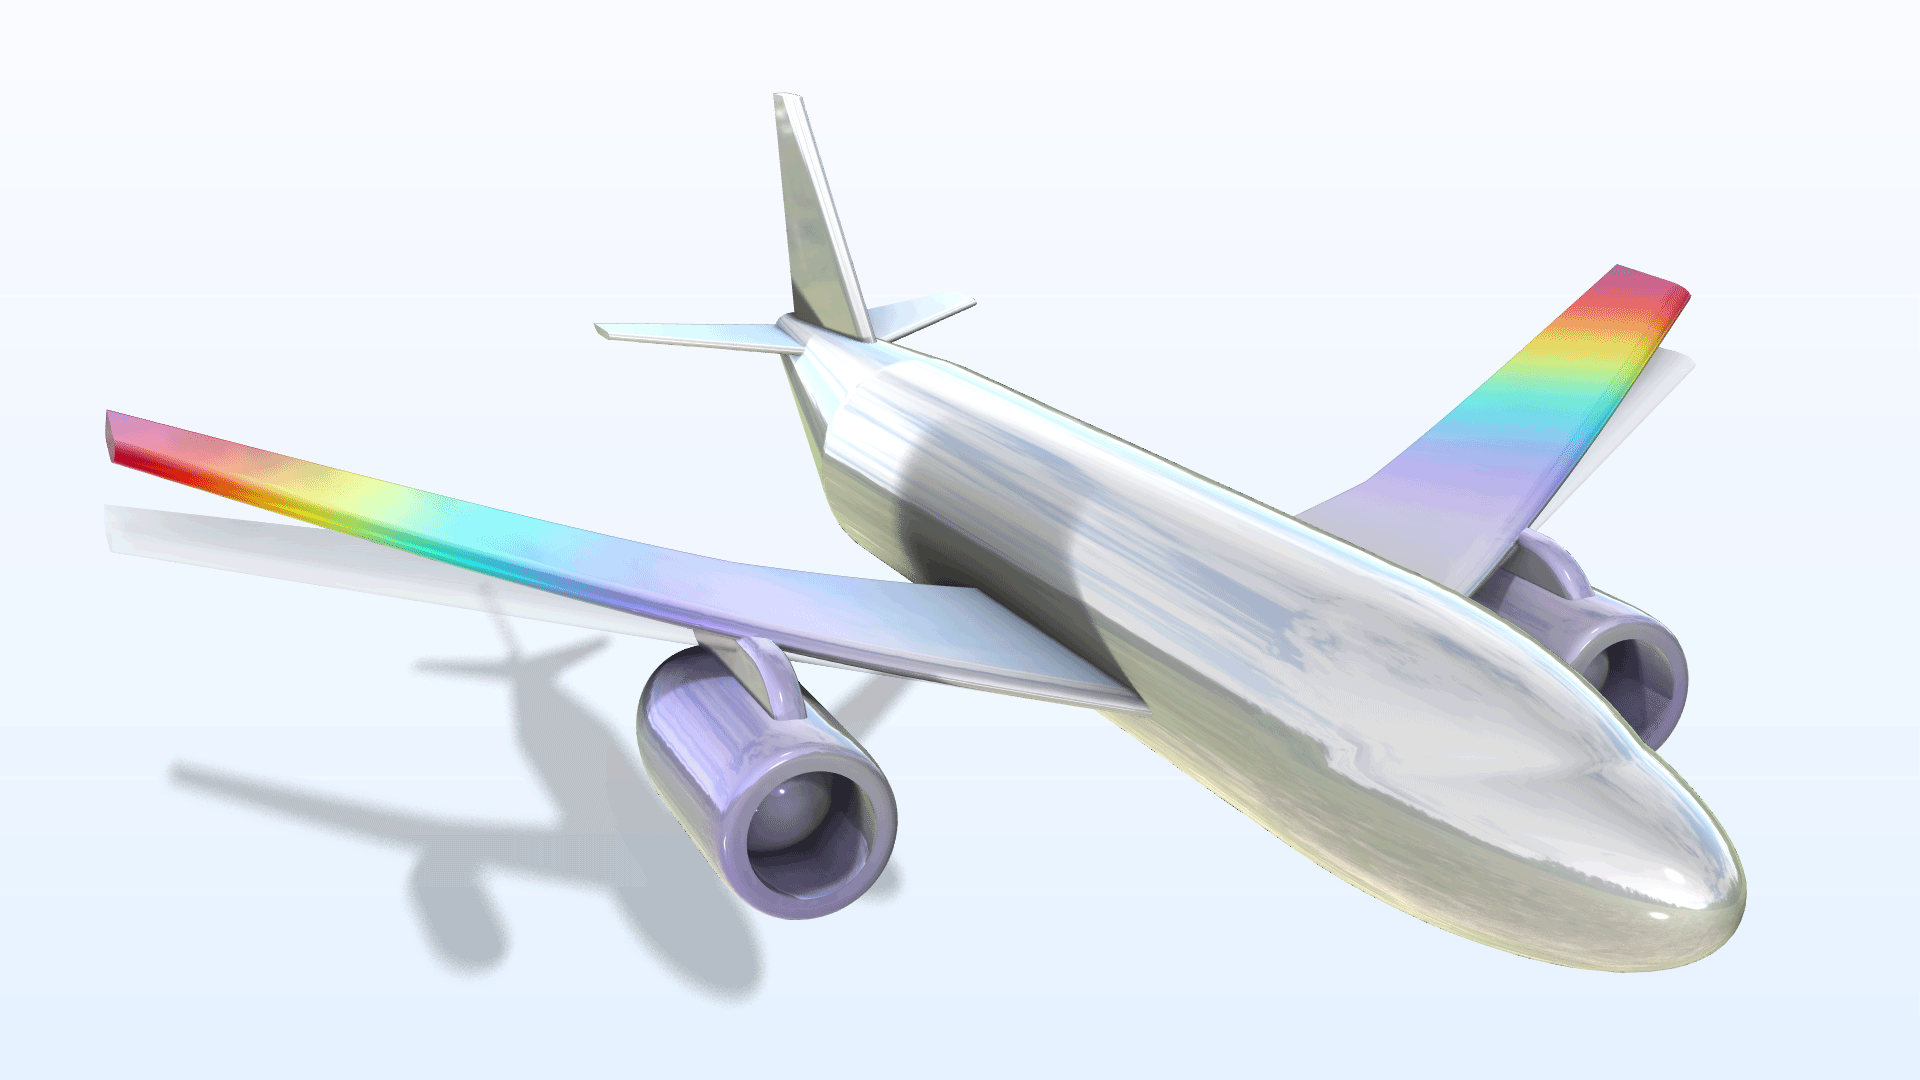 An airplane model showing the deformations of the wings in the Prism color table.